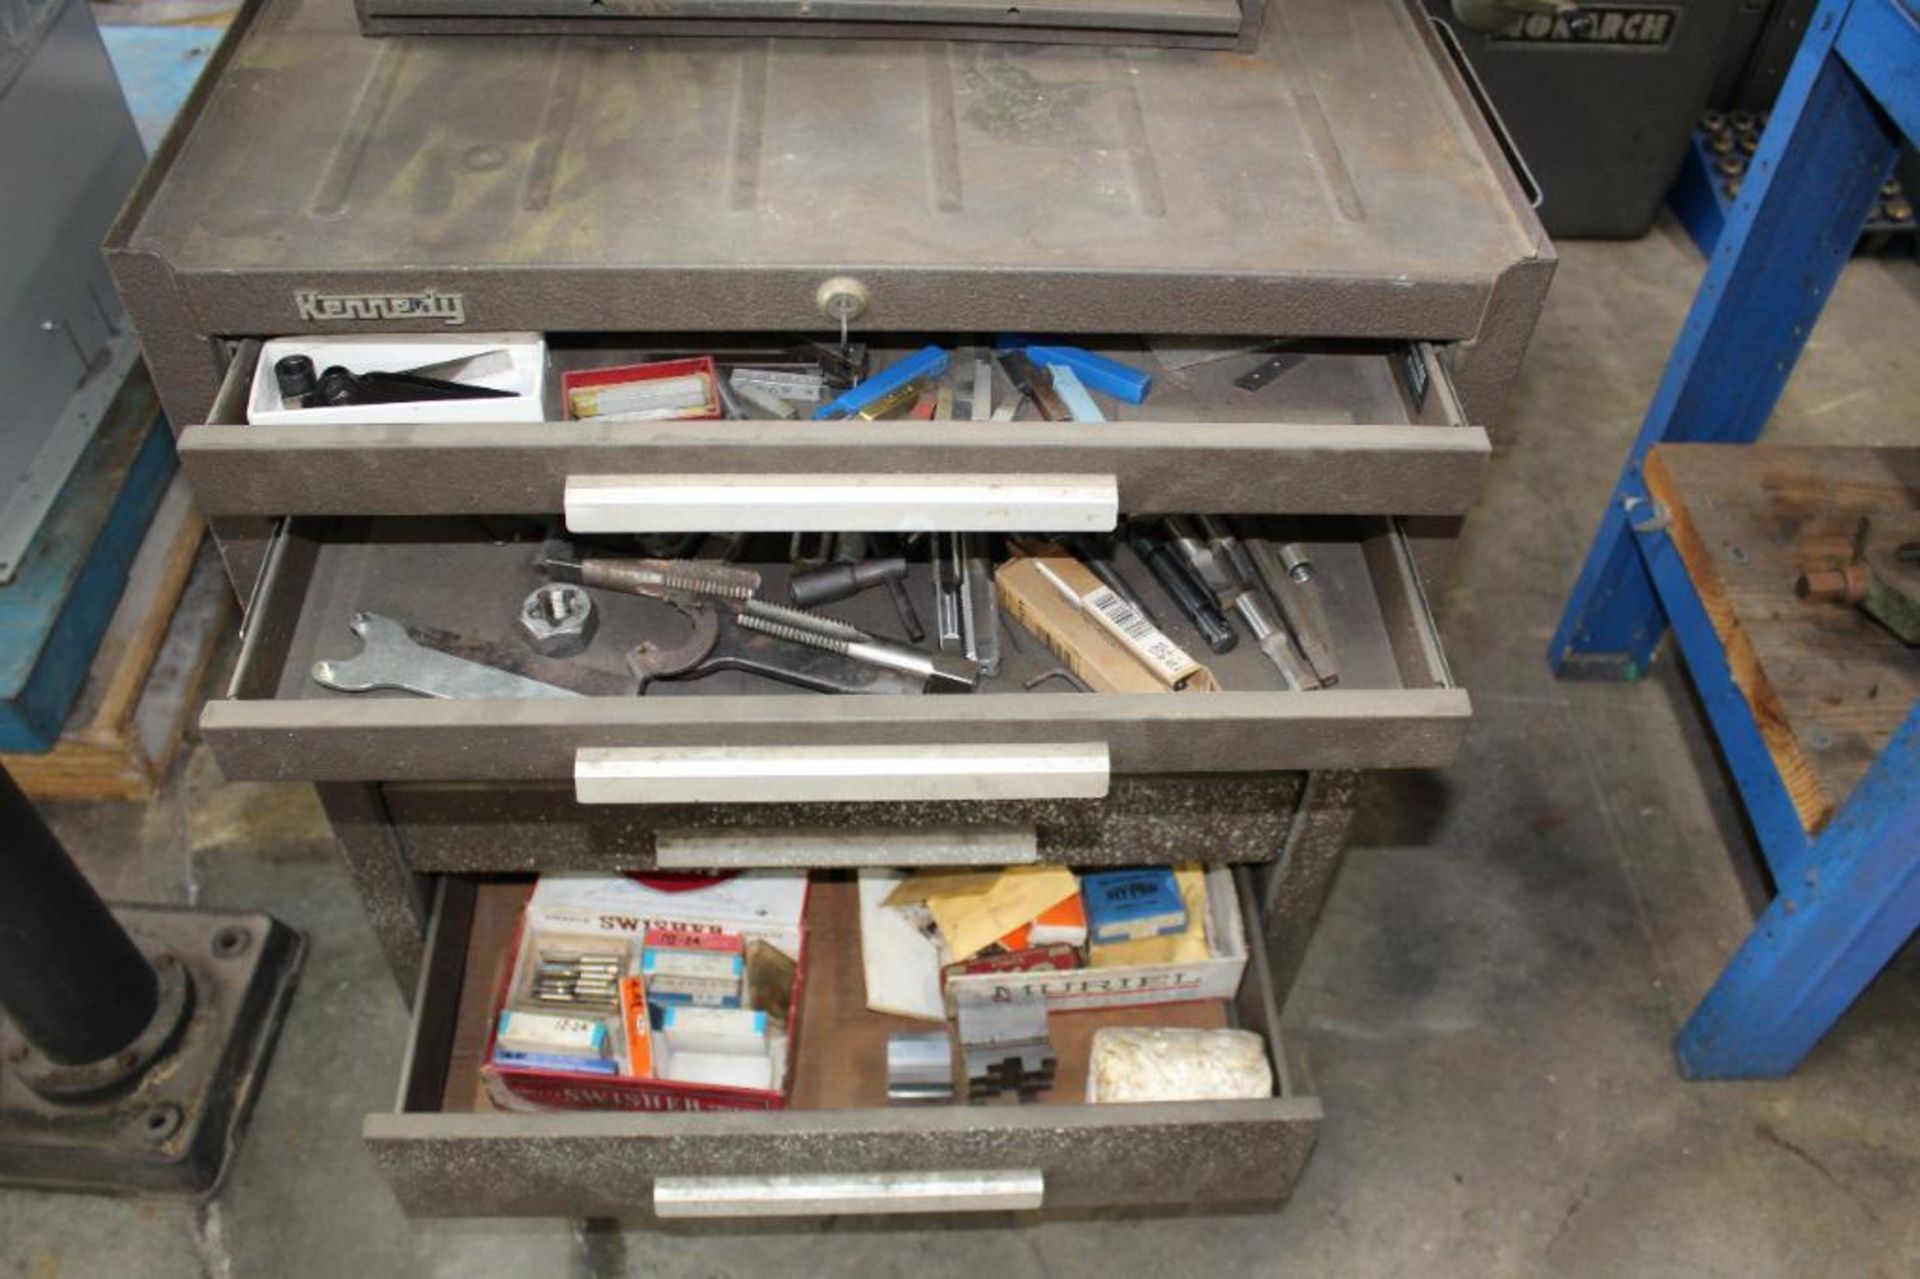 Kennedy tool box w/contents - Image 3 of 3